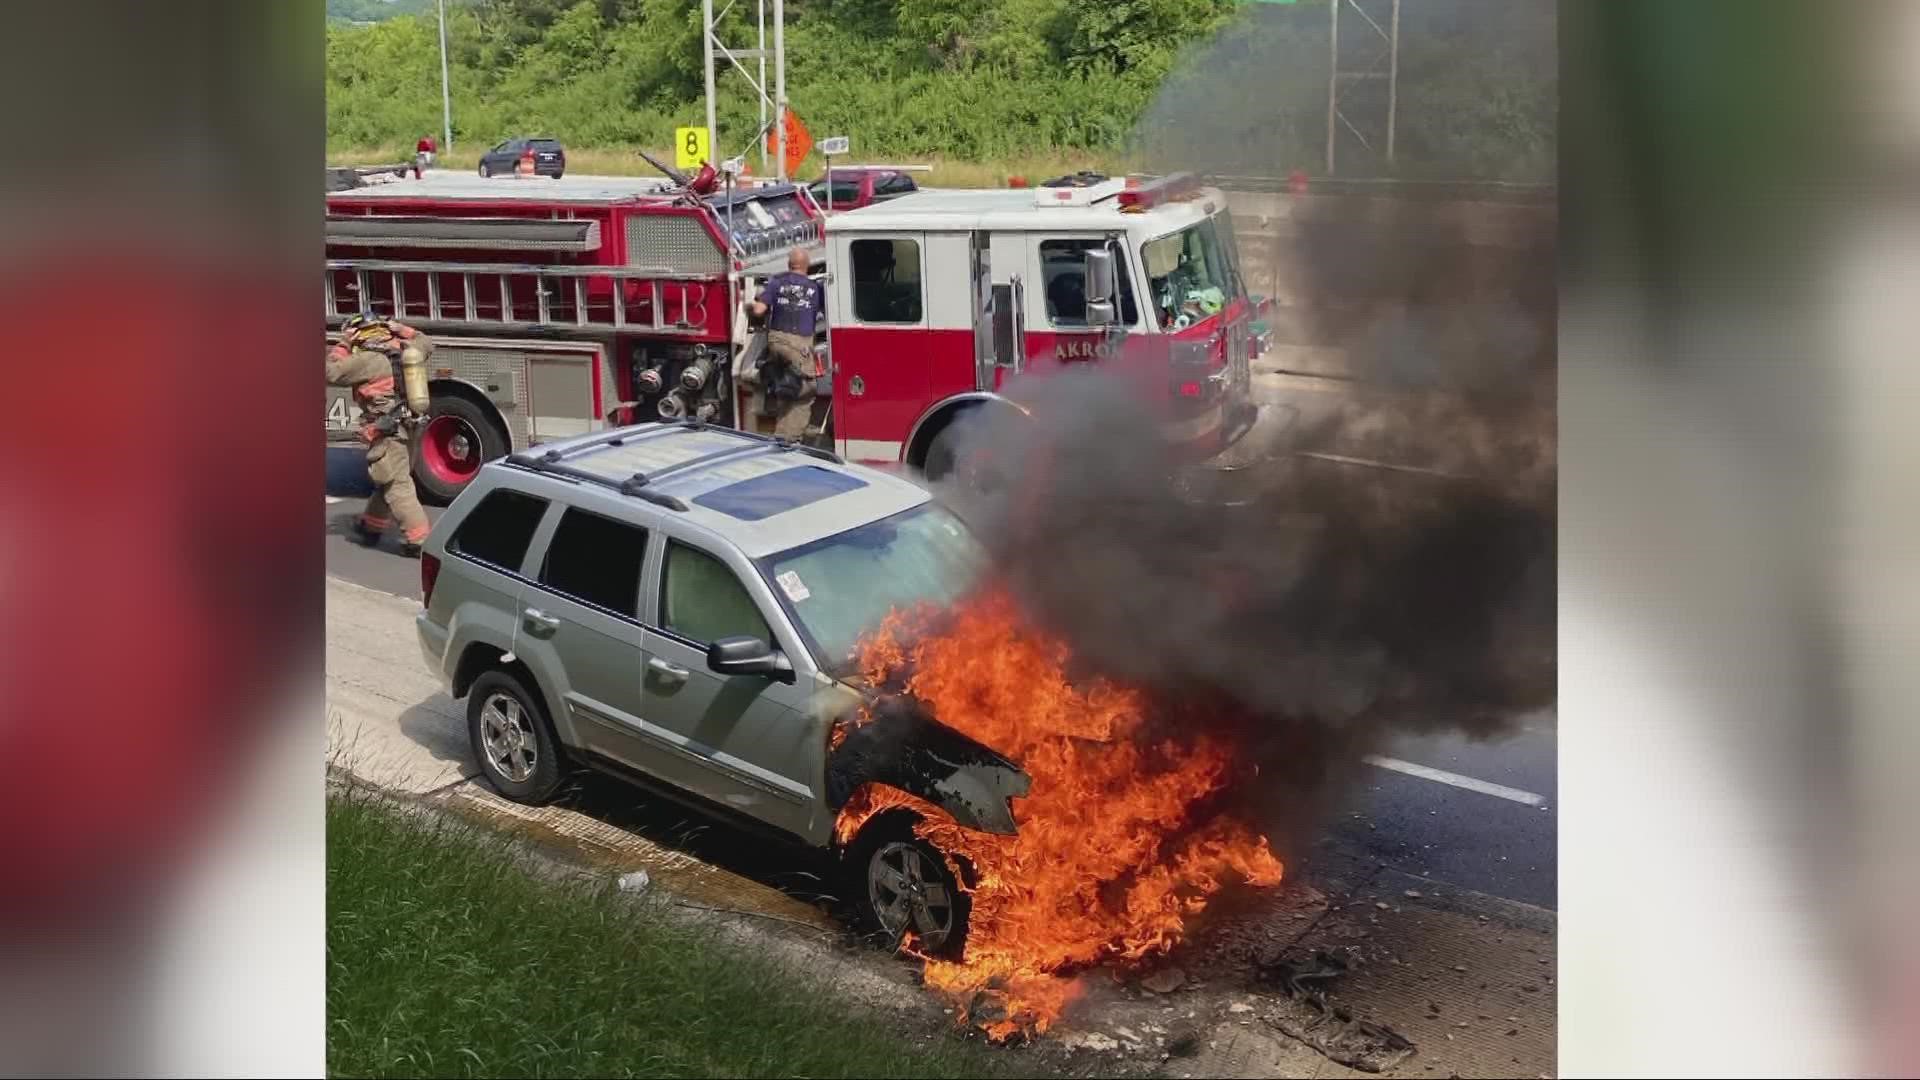 John Hansen was heading home to South Carolina, when he spotted a Jeep driving by on fire. He got the driver out just before it exploded.